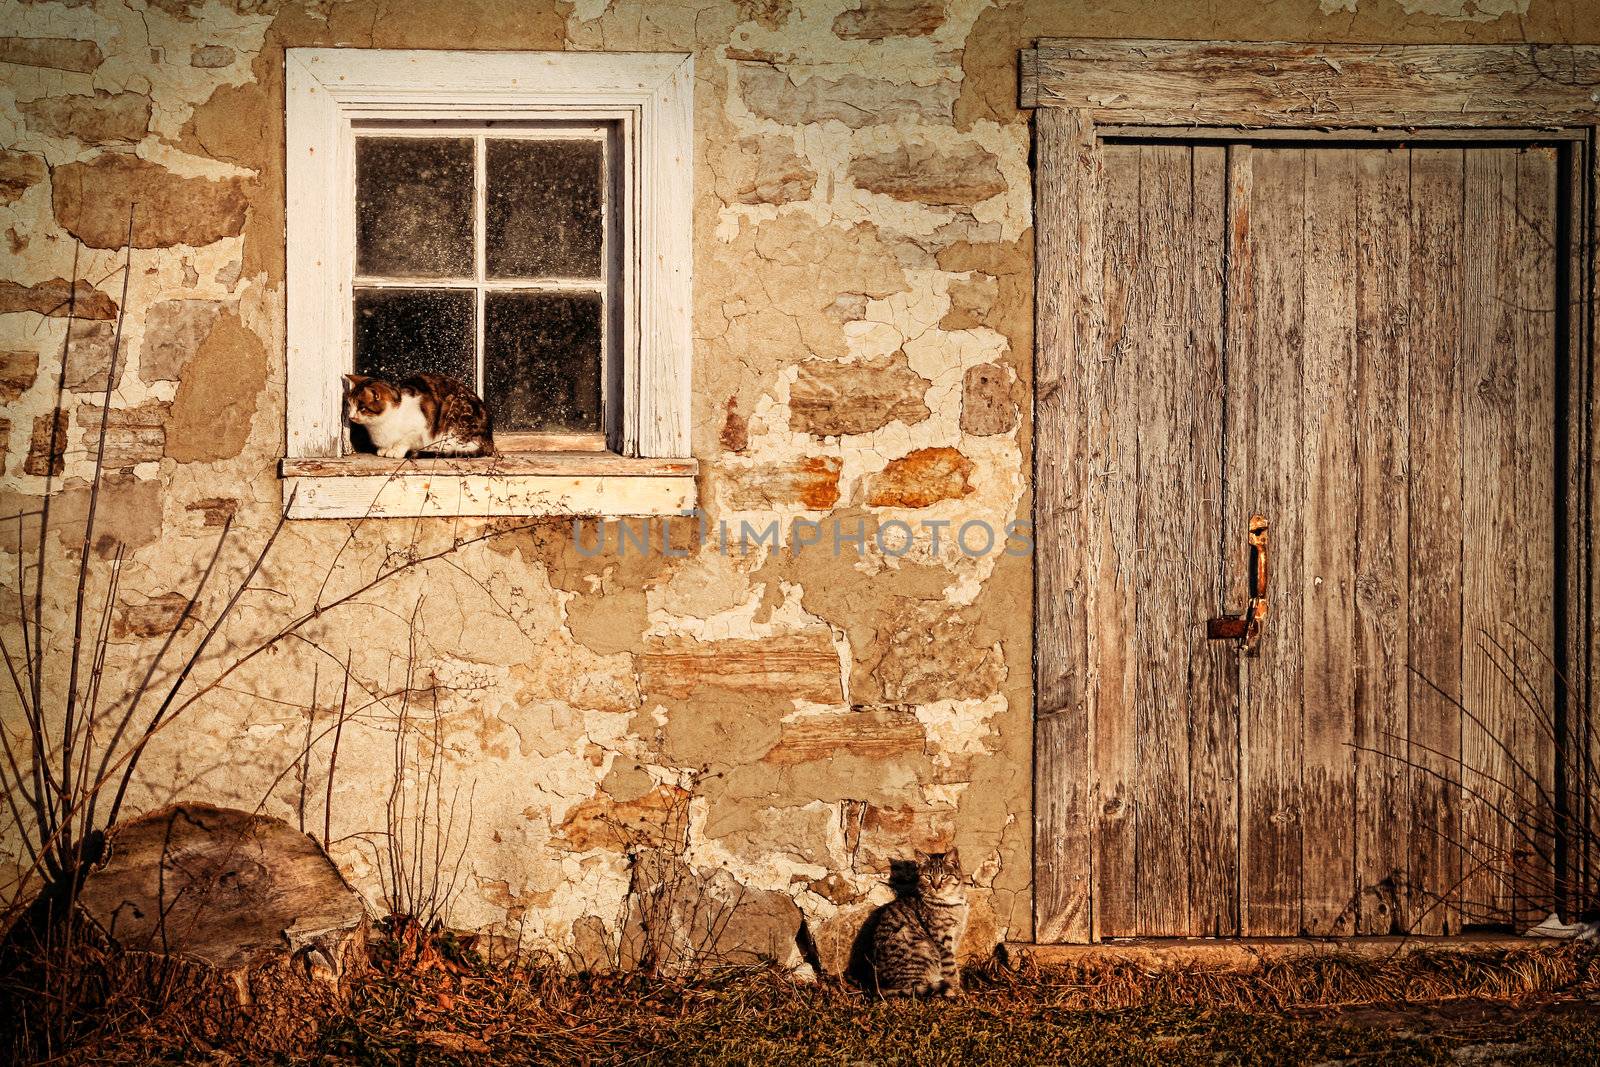 Rural barn wirh cats laying in the sun by Sandralise